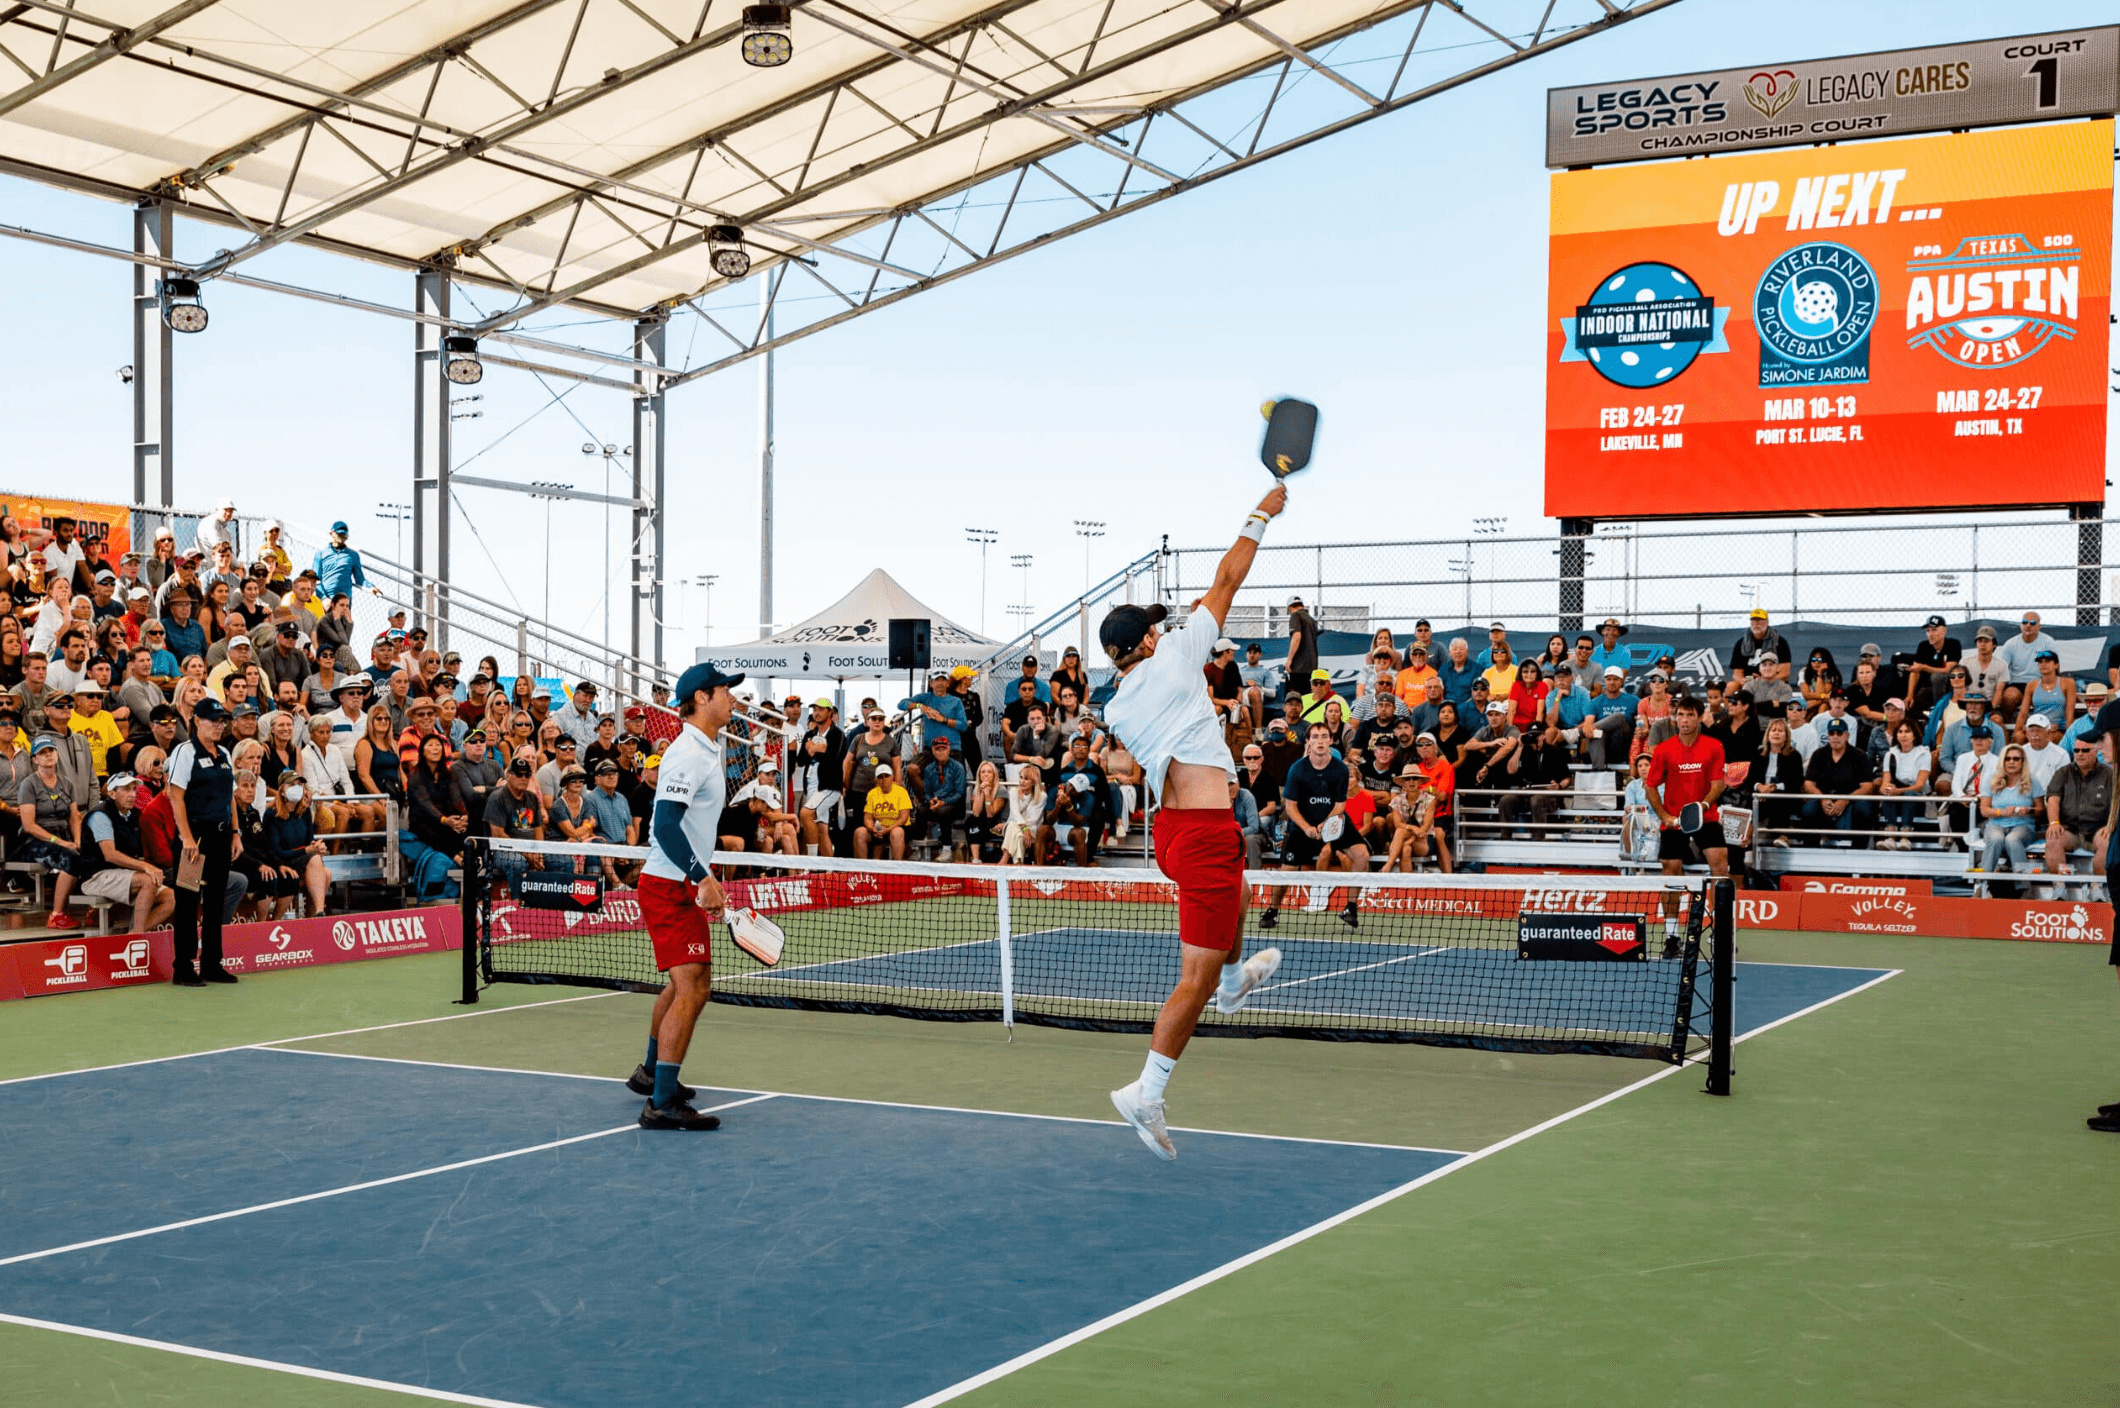 PPA Tour; Professional Pickleball; playing matches; players take the court